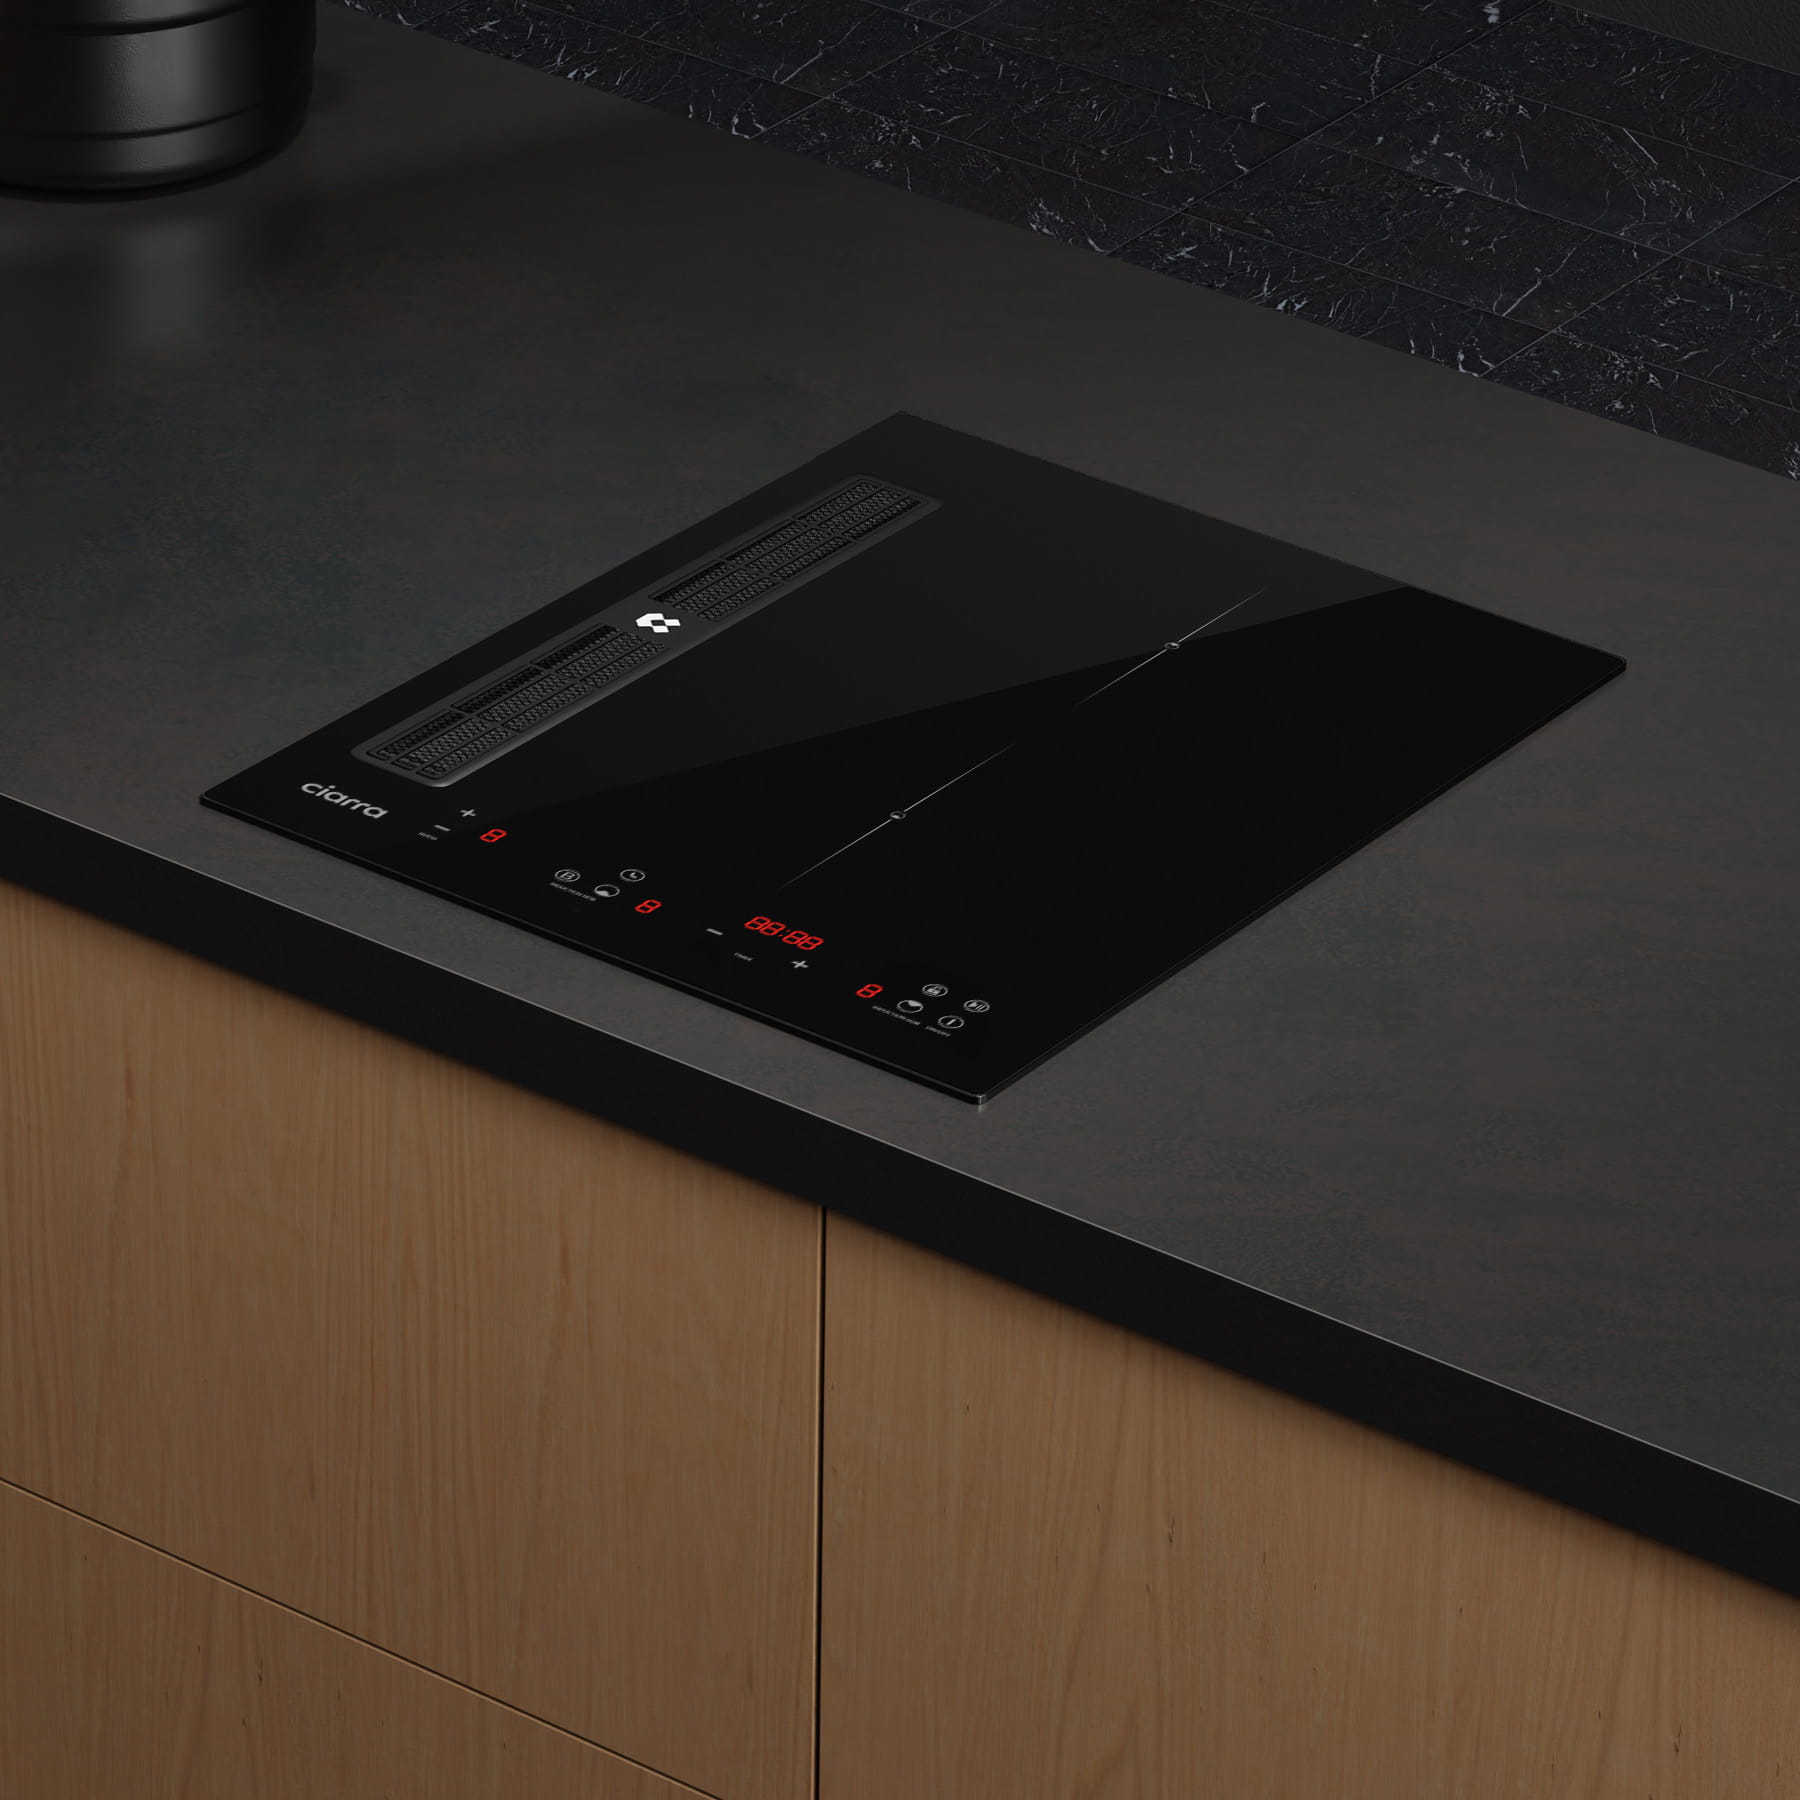 Ciarra ONE Induction Extractor Hob Domino 390mm with Built-in Plasma⁺ System CBBEH392B-OW